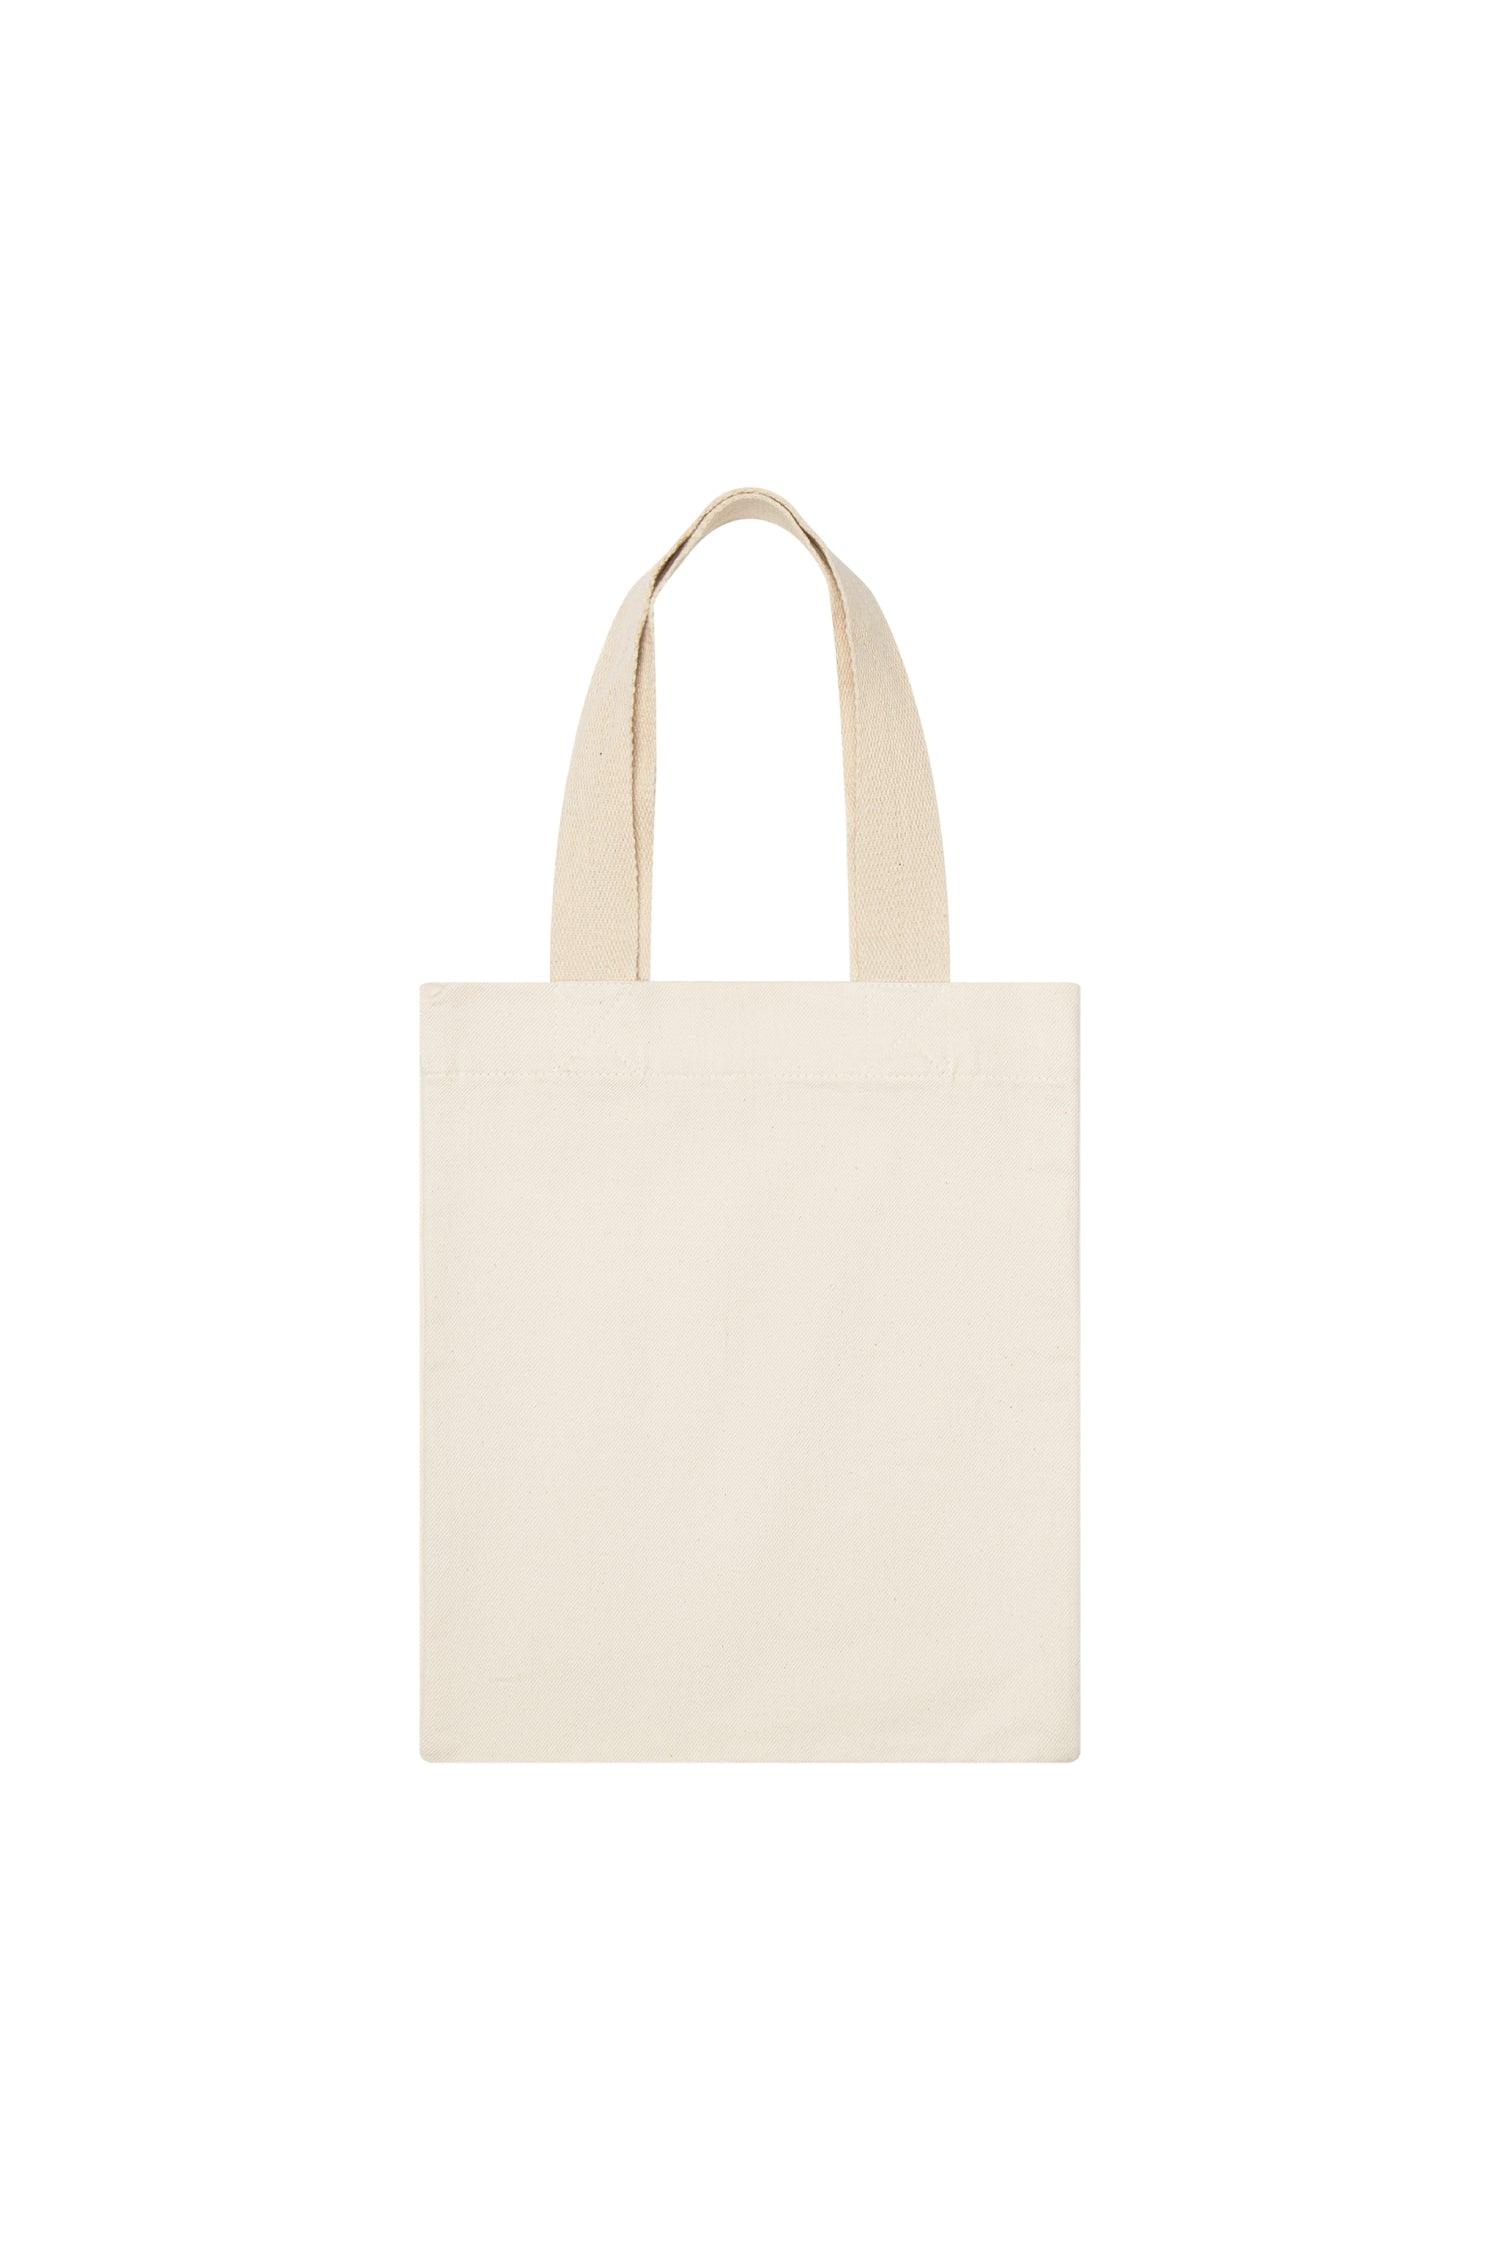 Classic Closed-Loop Tote - Everybody.World